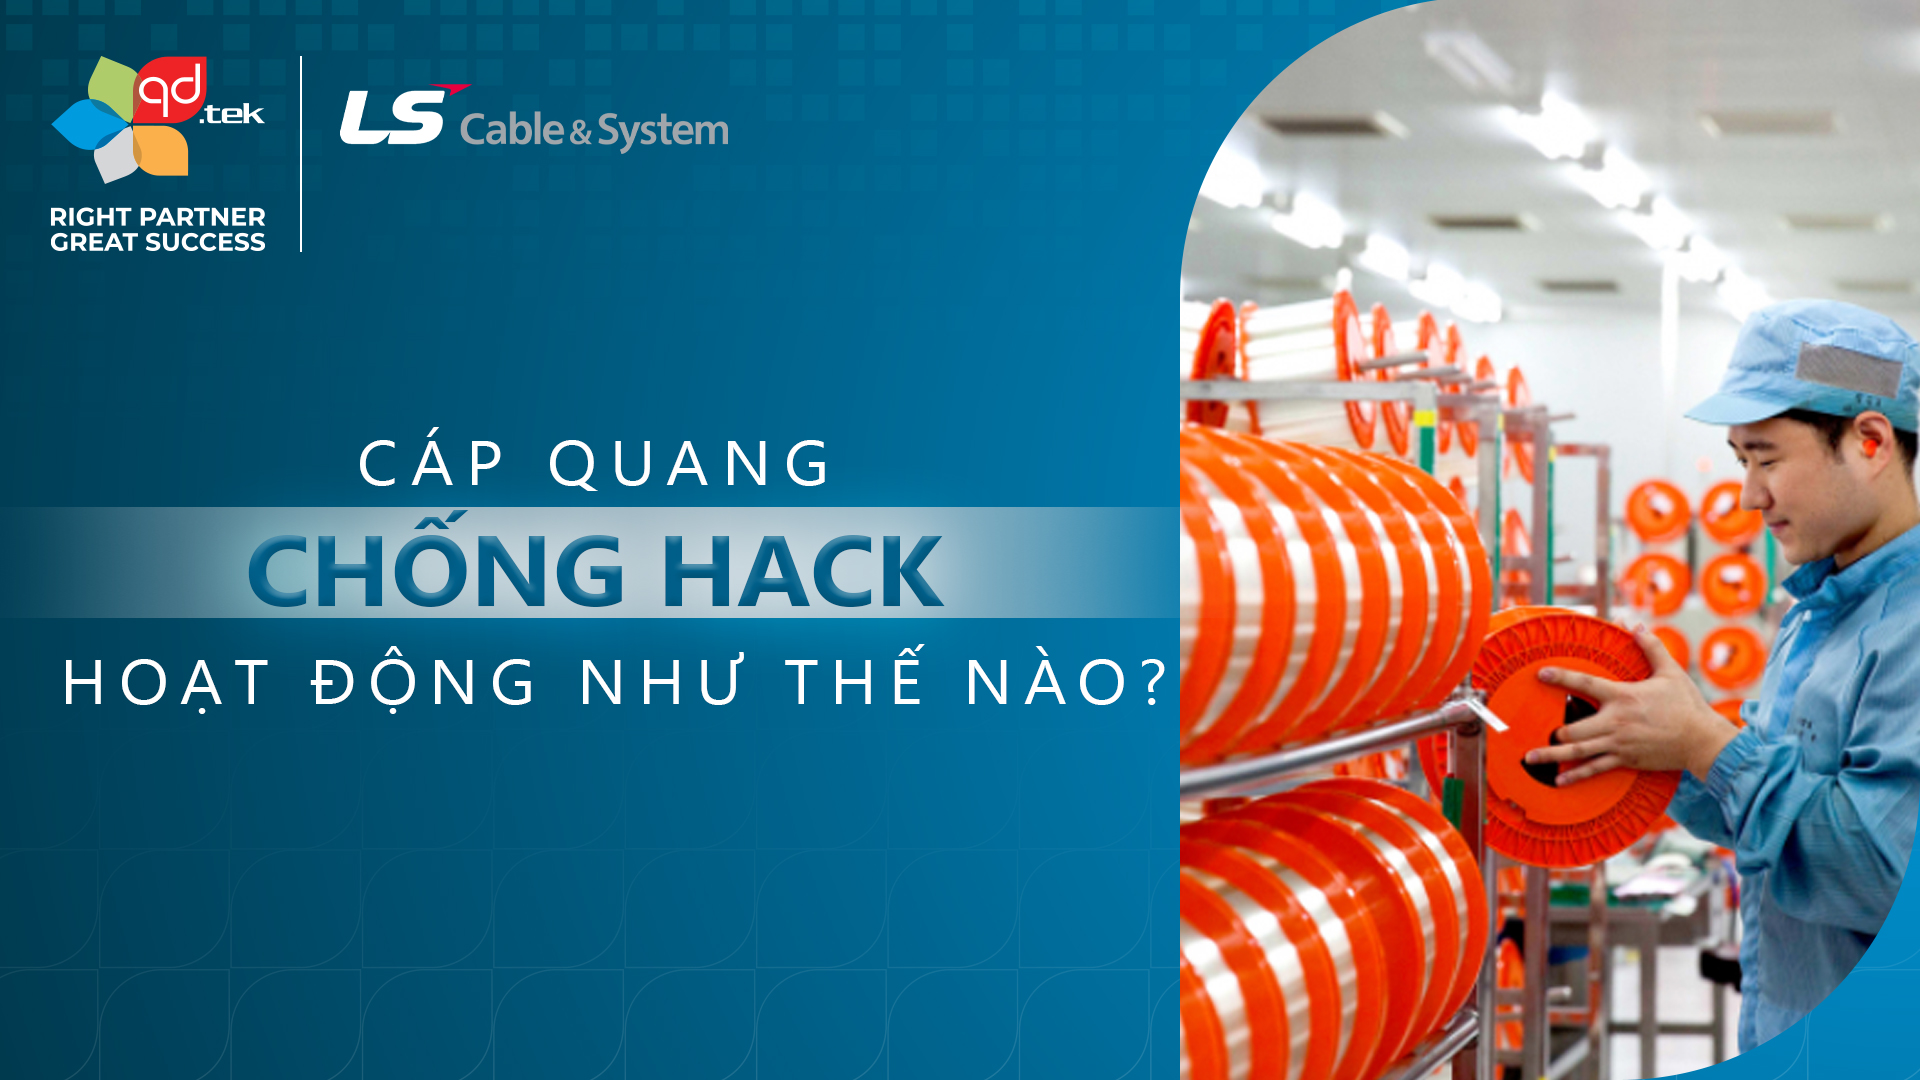 LS Cable & System develops an optical cable for ‘hacking prevention’